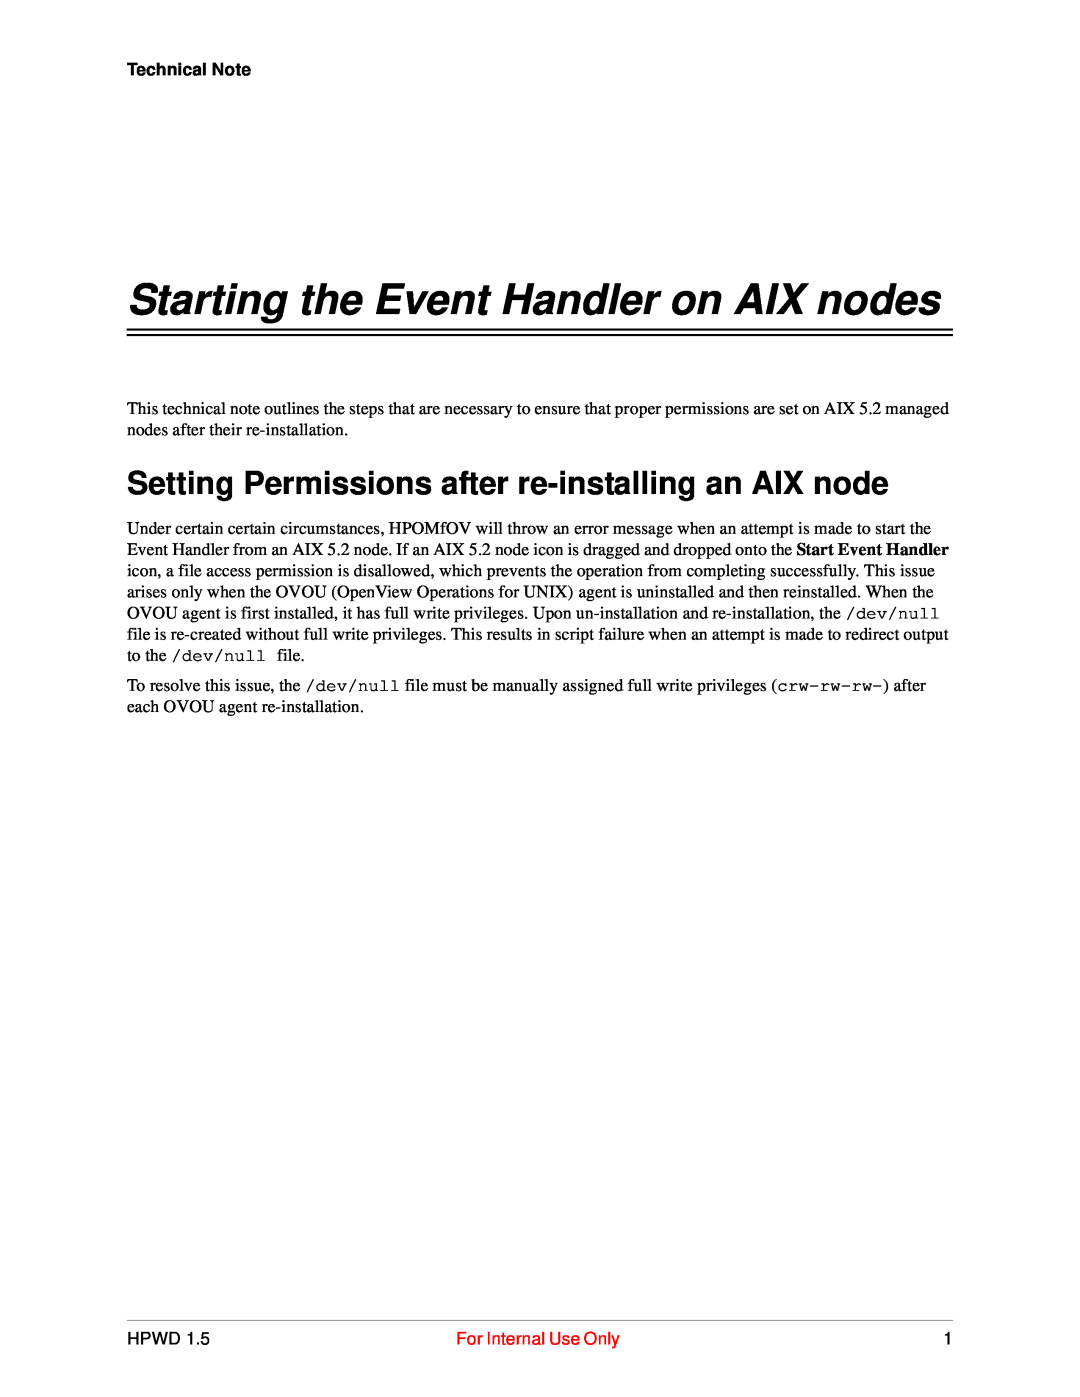 HP Output Management Services Software manual For Internal Use Only, Starting the Event Handler on AIX nodes 